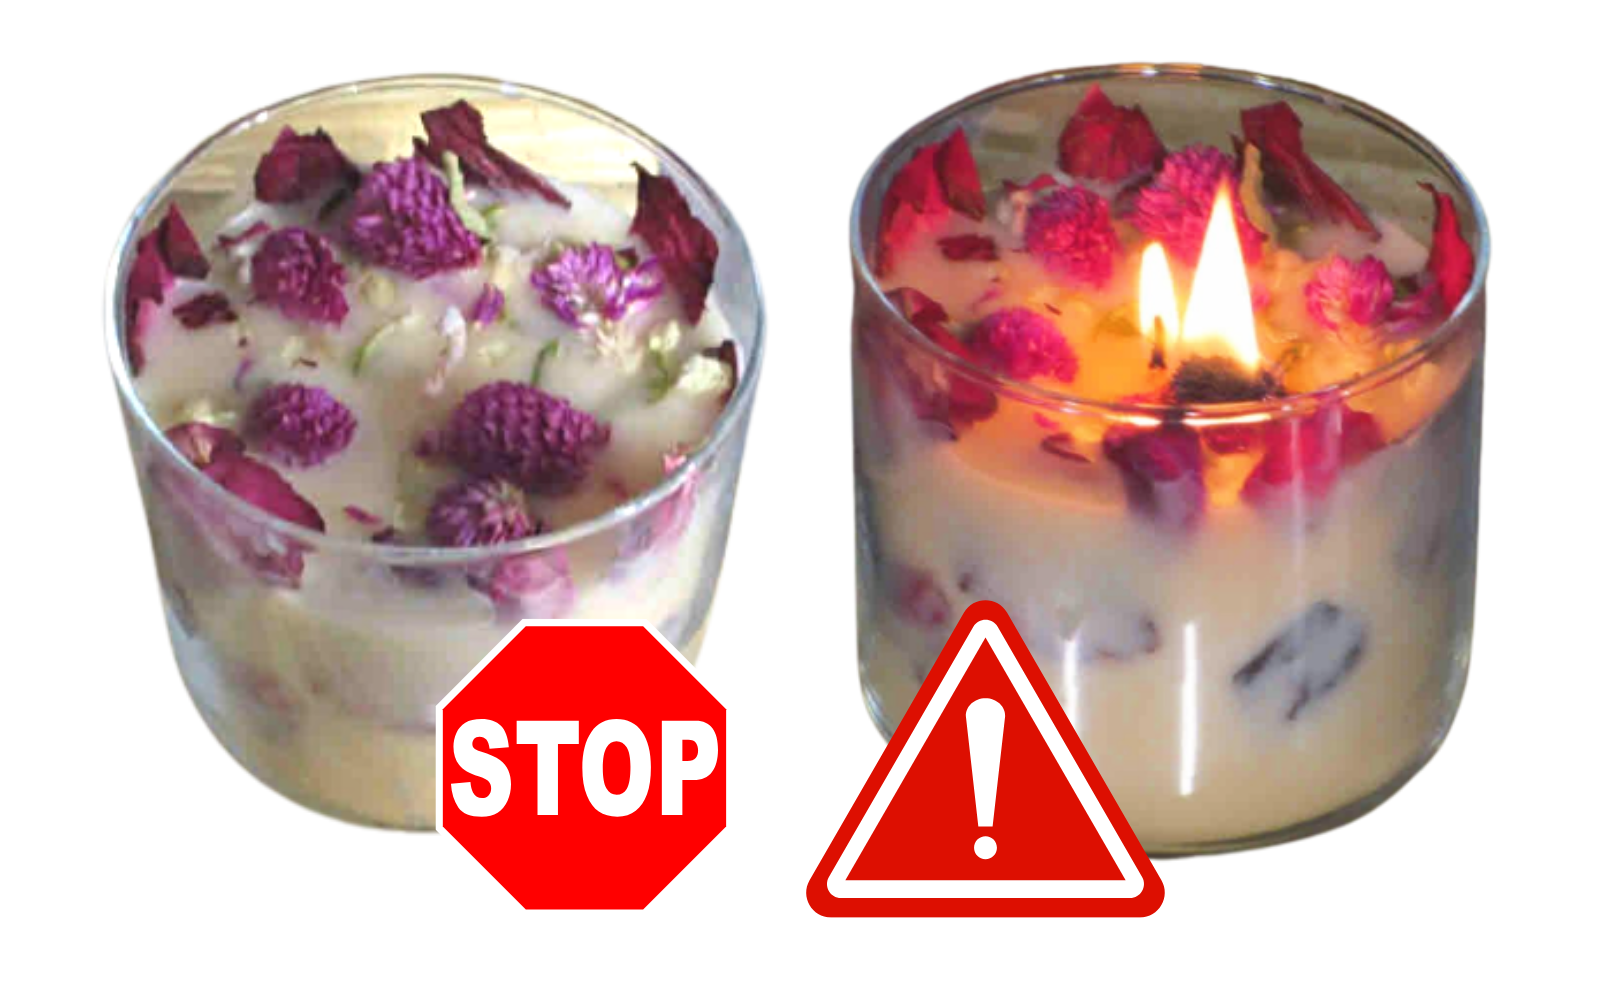 NEVER USE BOTANICALS IN A CANDLE